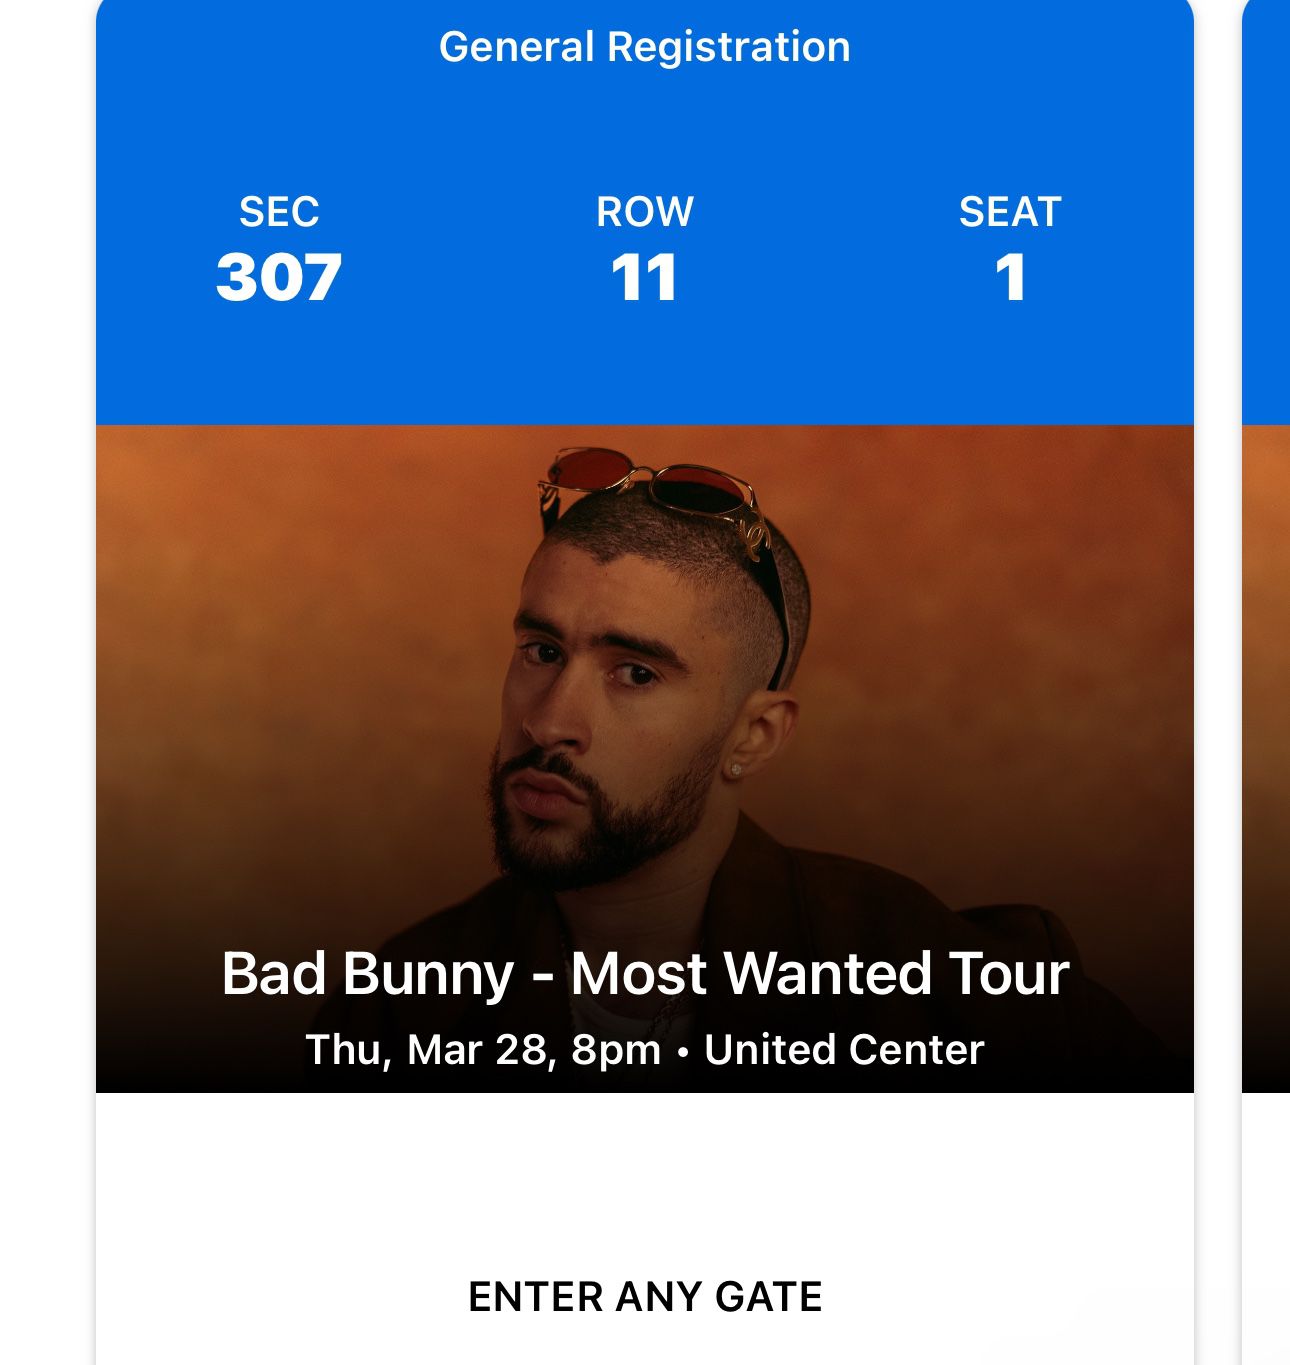 BAD Bunny Most Wanted Tour Tickets 5 Seats 300 Section 